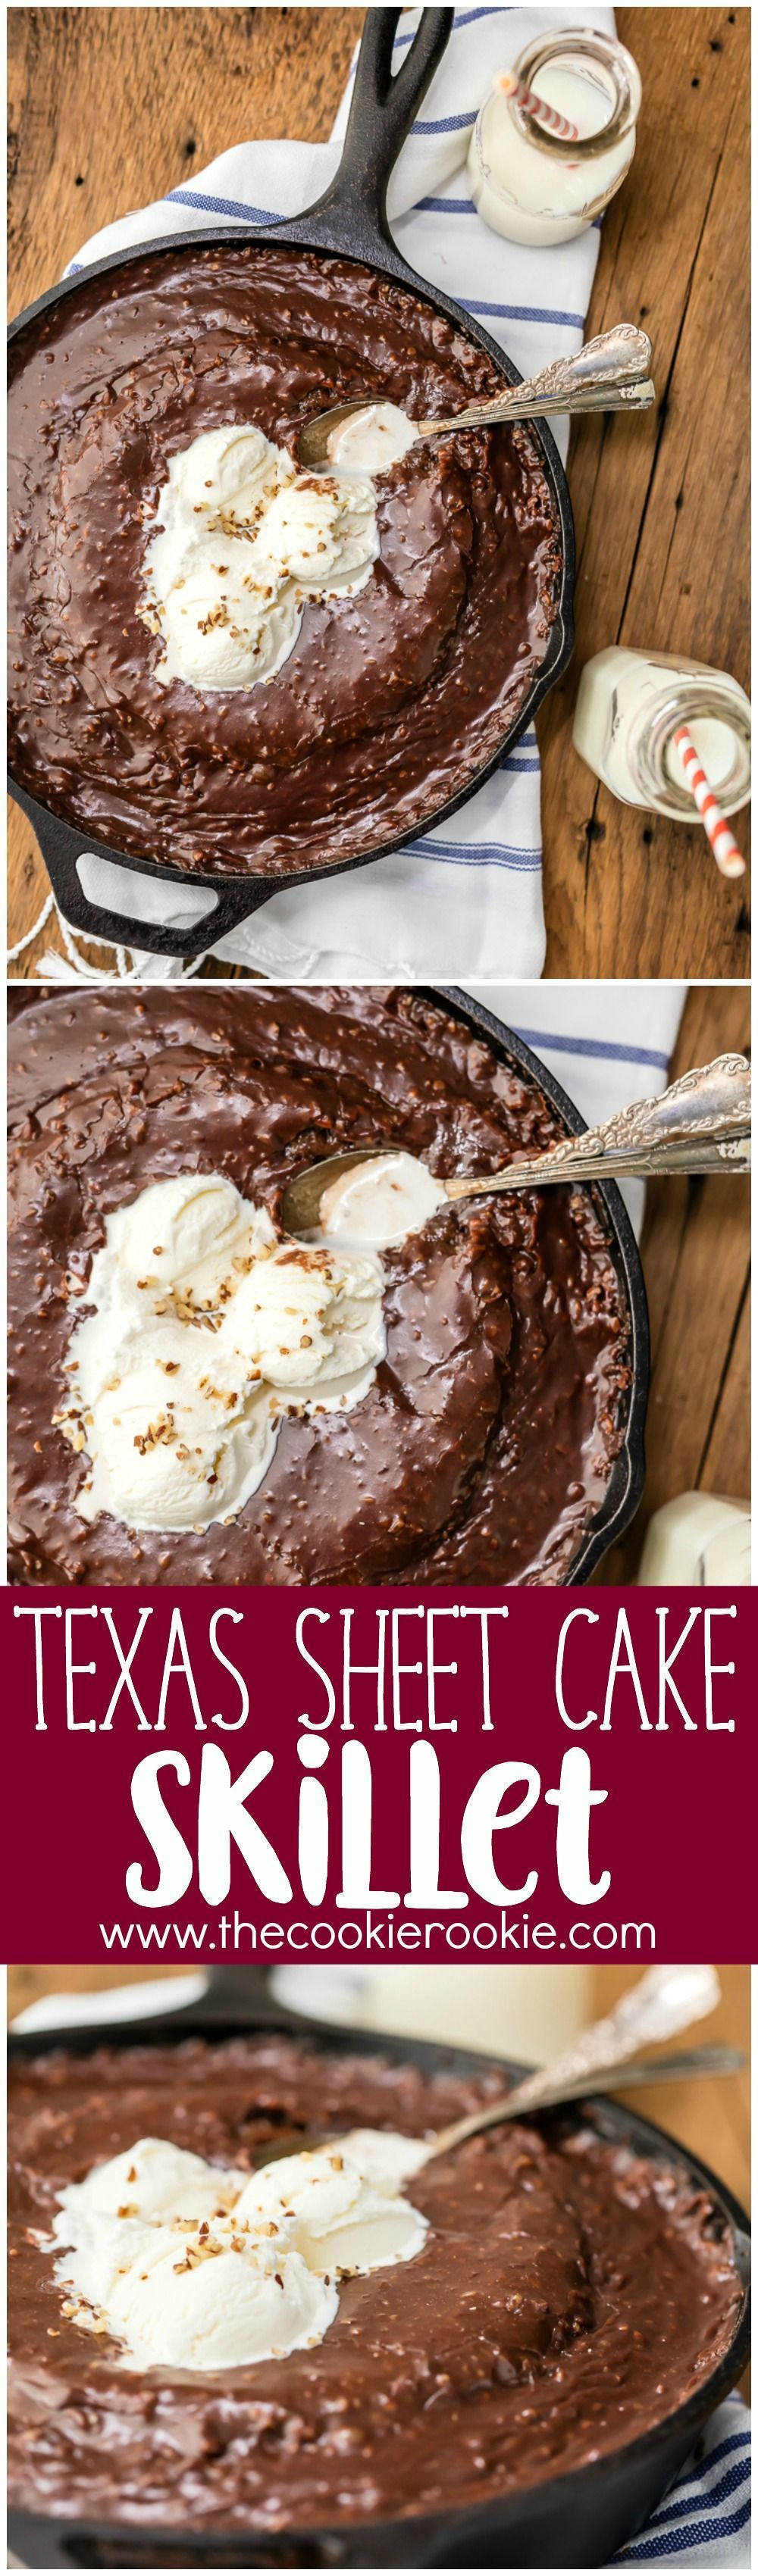 GOOEY TEXAS SHEET CAKE SKILLET! Top with ice cream and eat with a spoon. HEAVEN! This dessert is the ultim